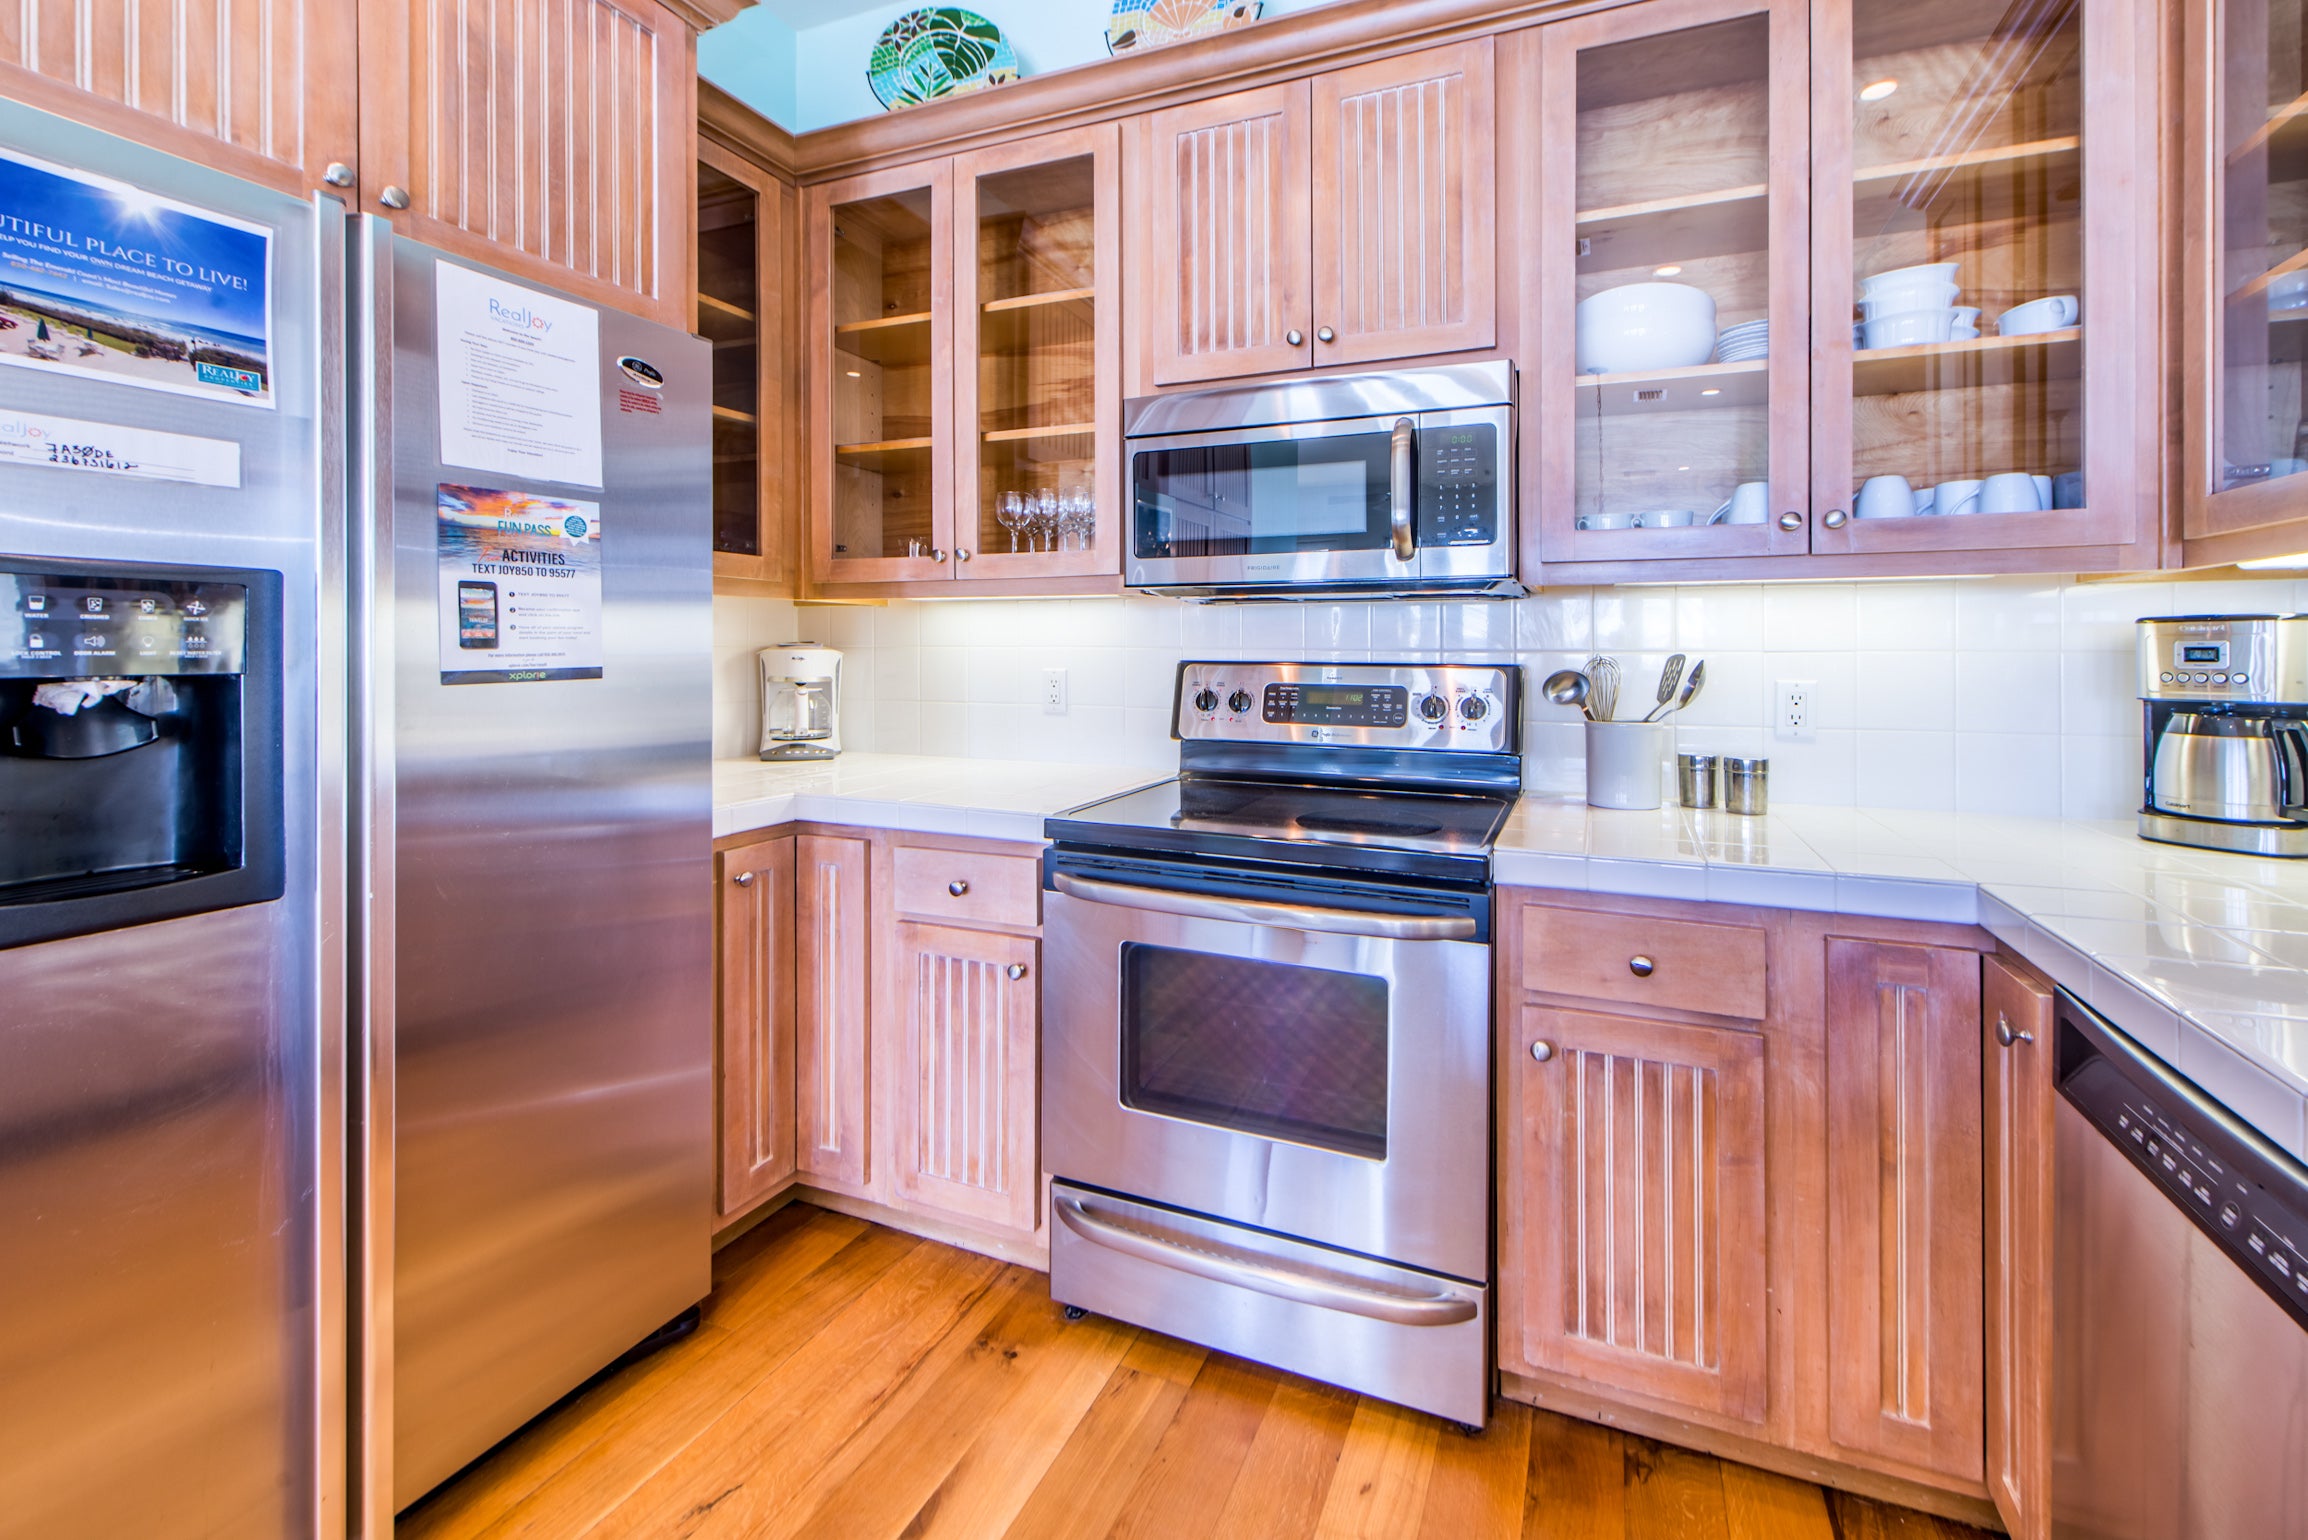 Your chef will love this kitchen!